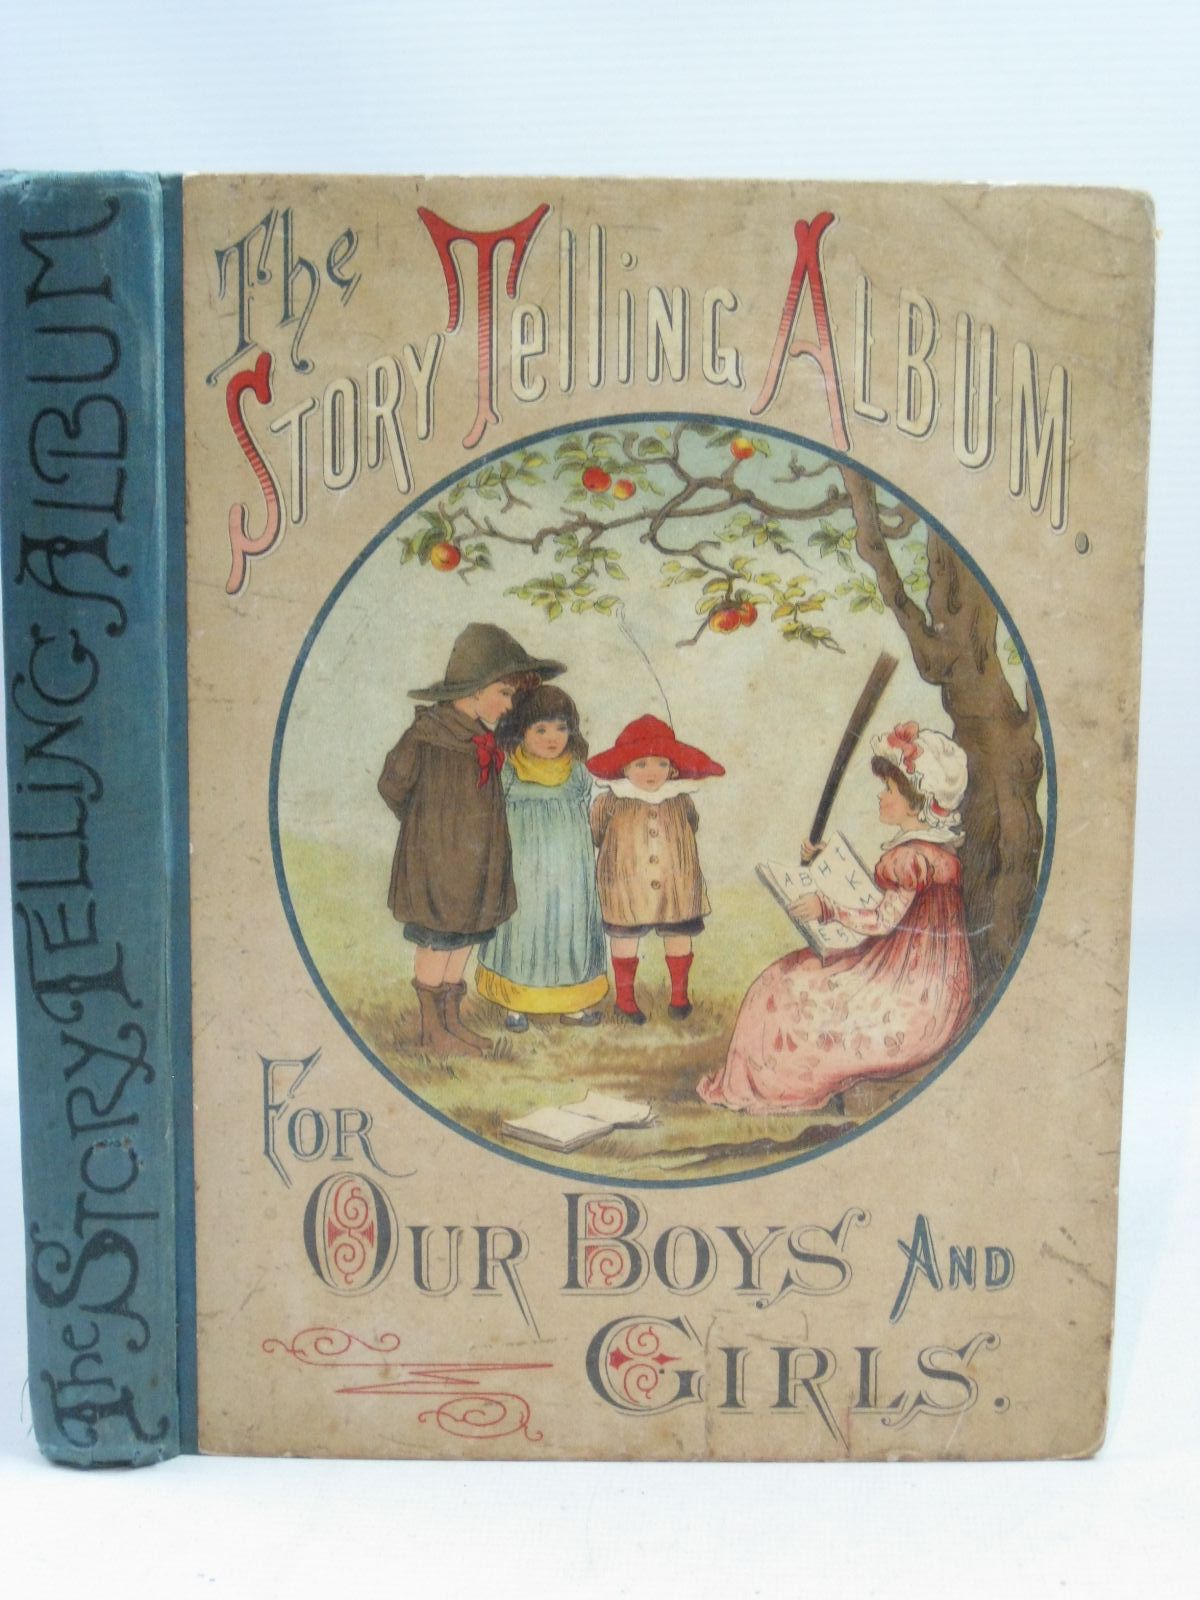 Photo of THE STORY TELLING ALBUM FOR OUR BOYS AND GIRLS published by Wells Gardner, Darton And Co (STOCK CODE: 1404993)  for sale by Stella & Rose's Books